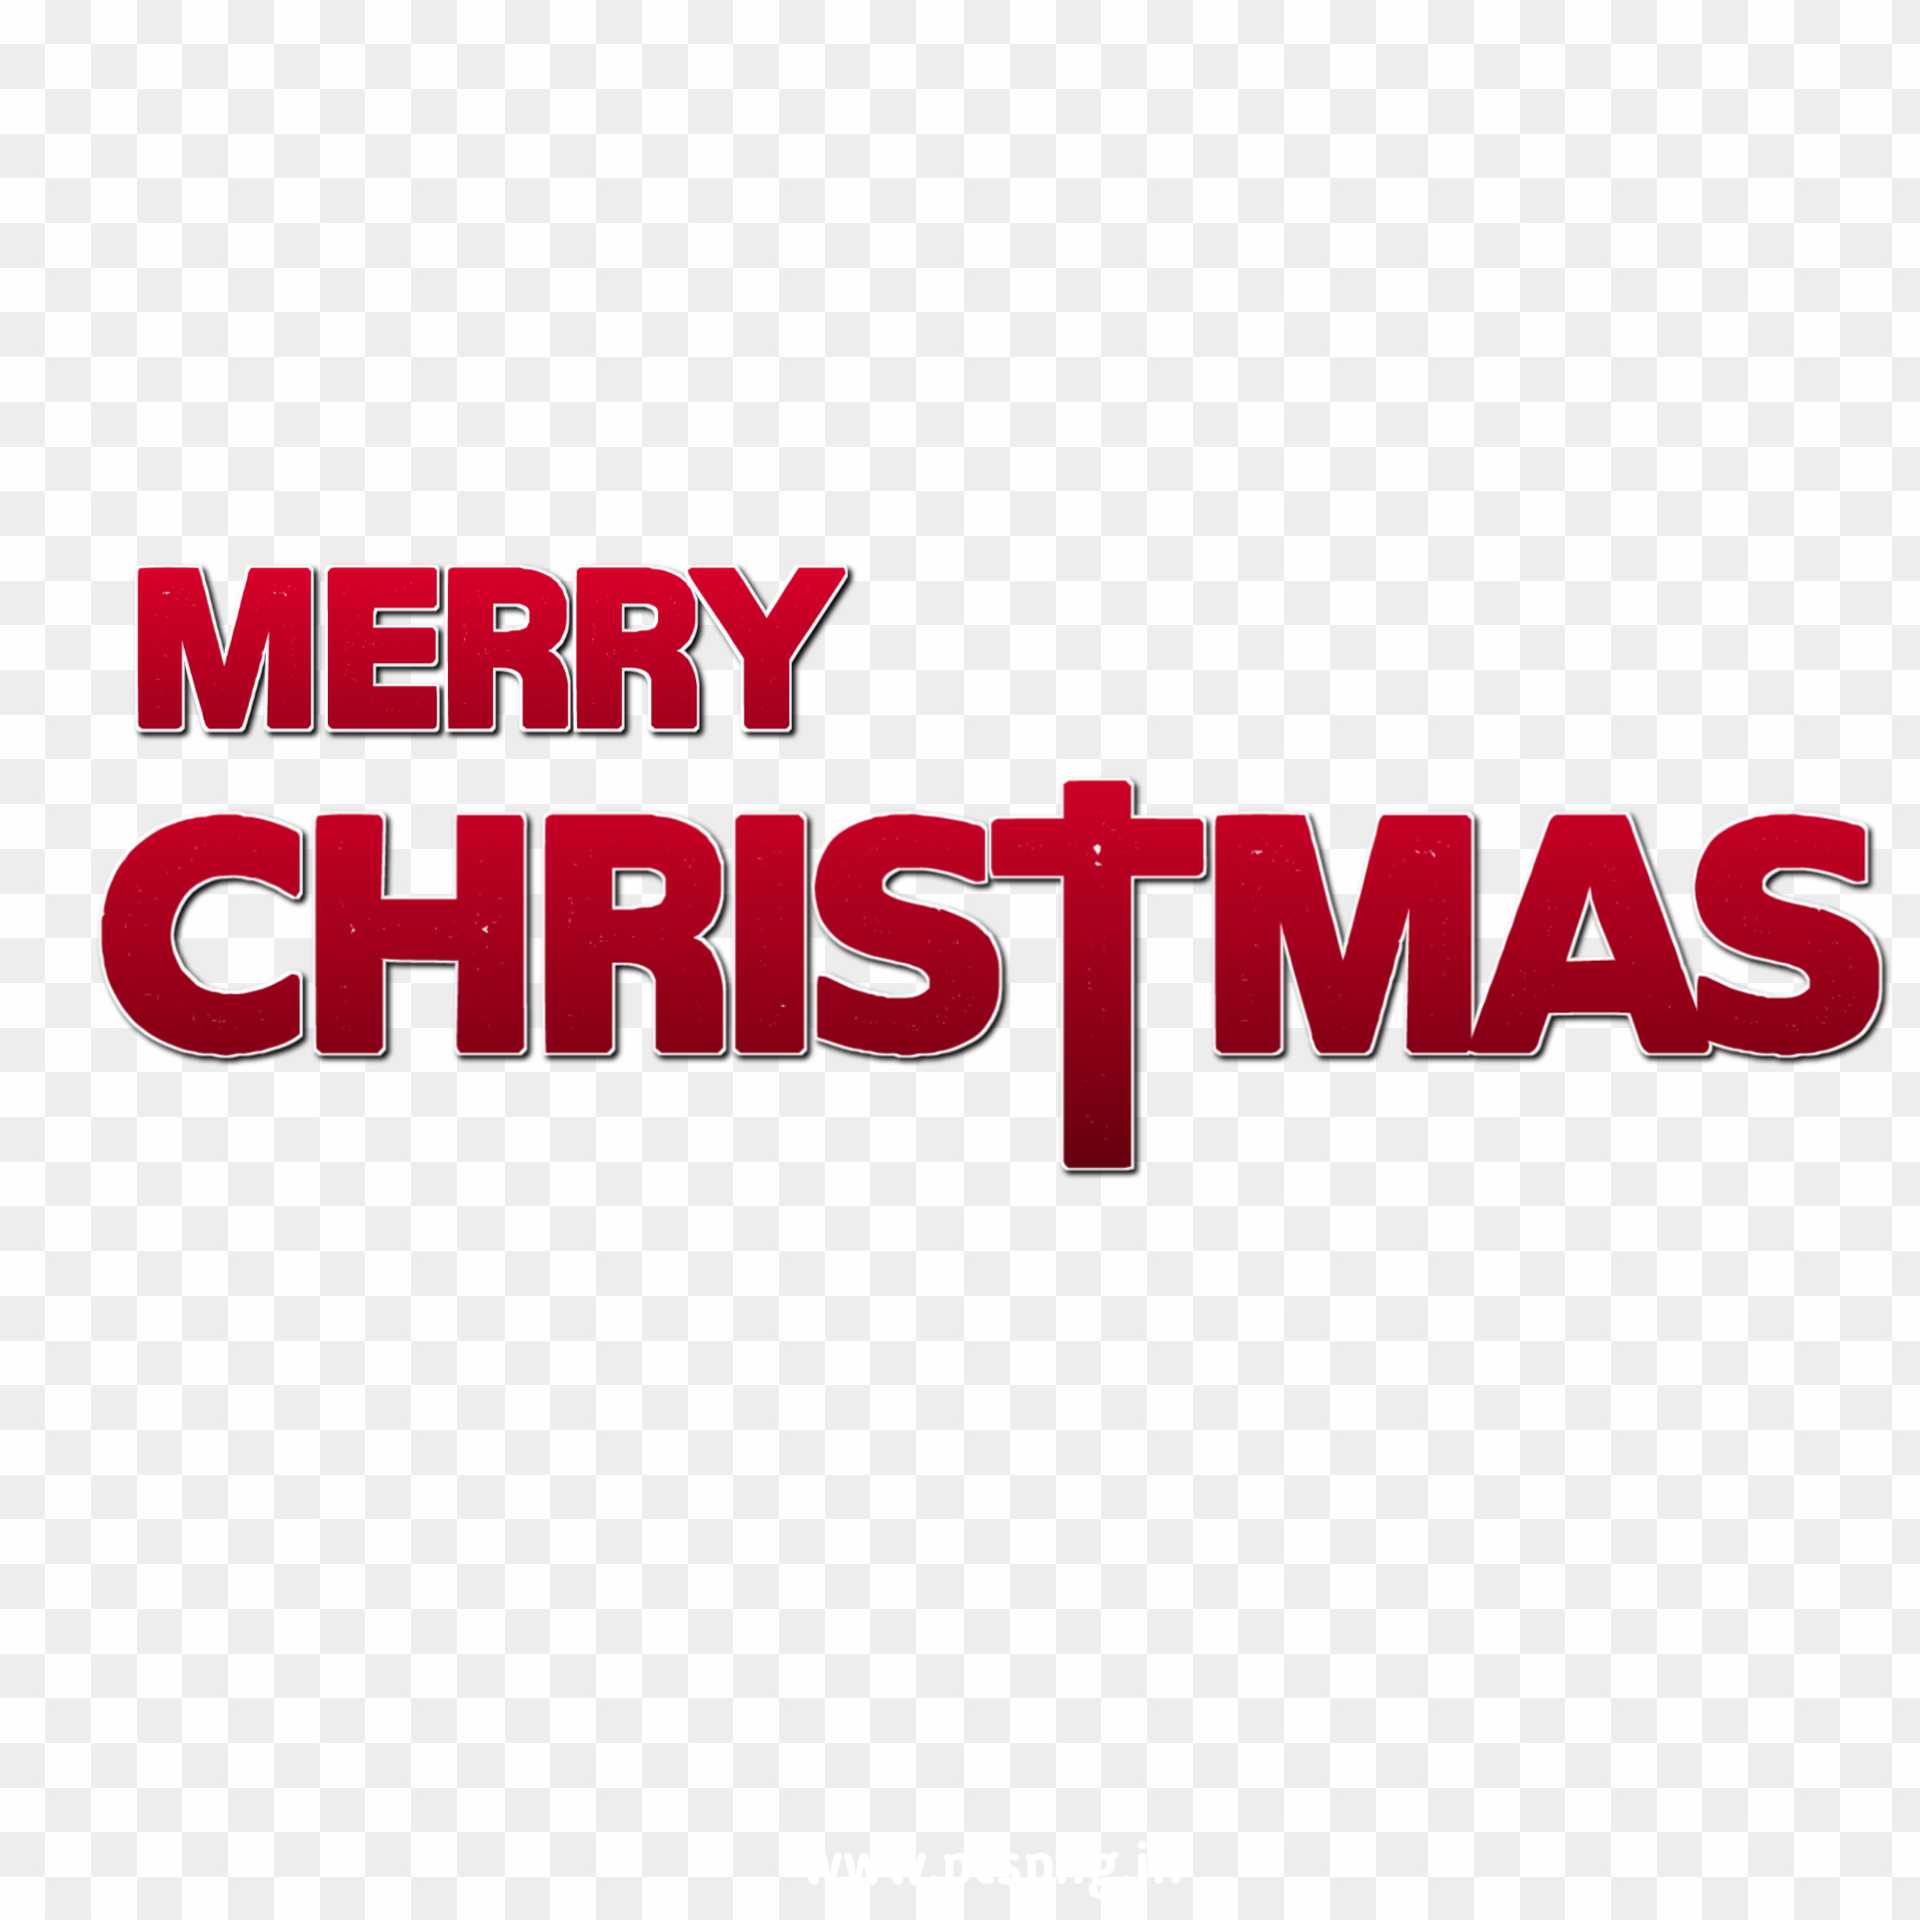 Merry christmas png download 